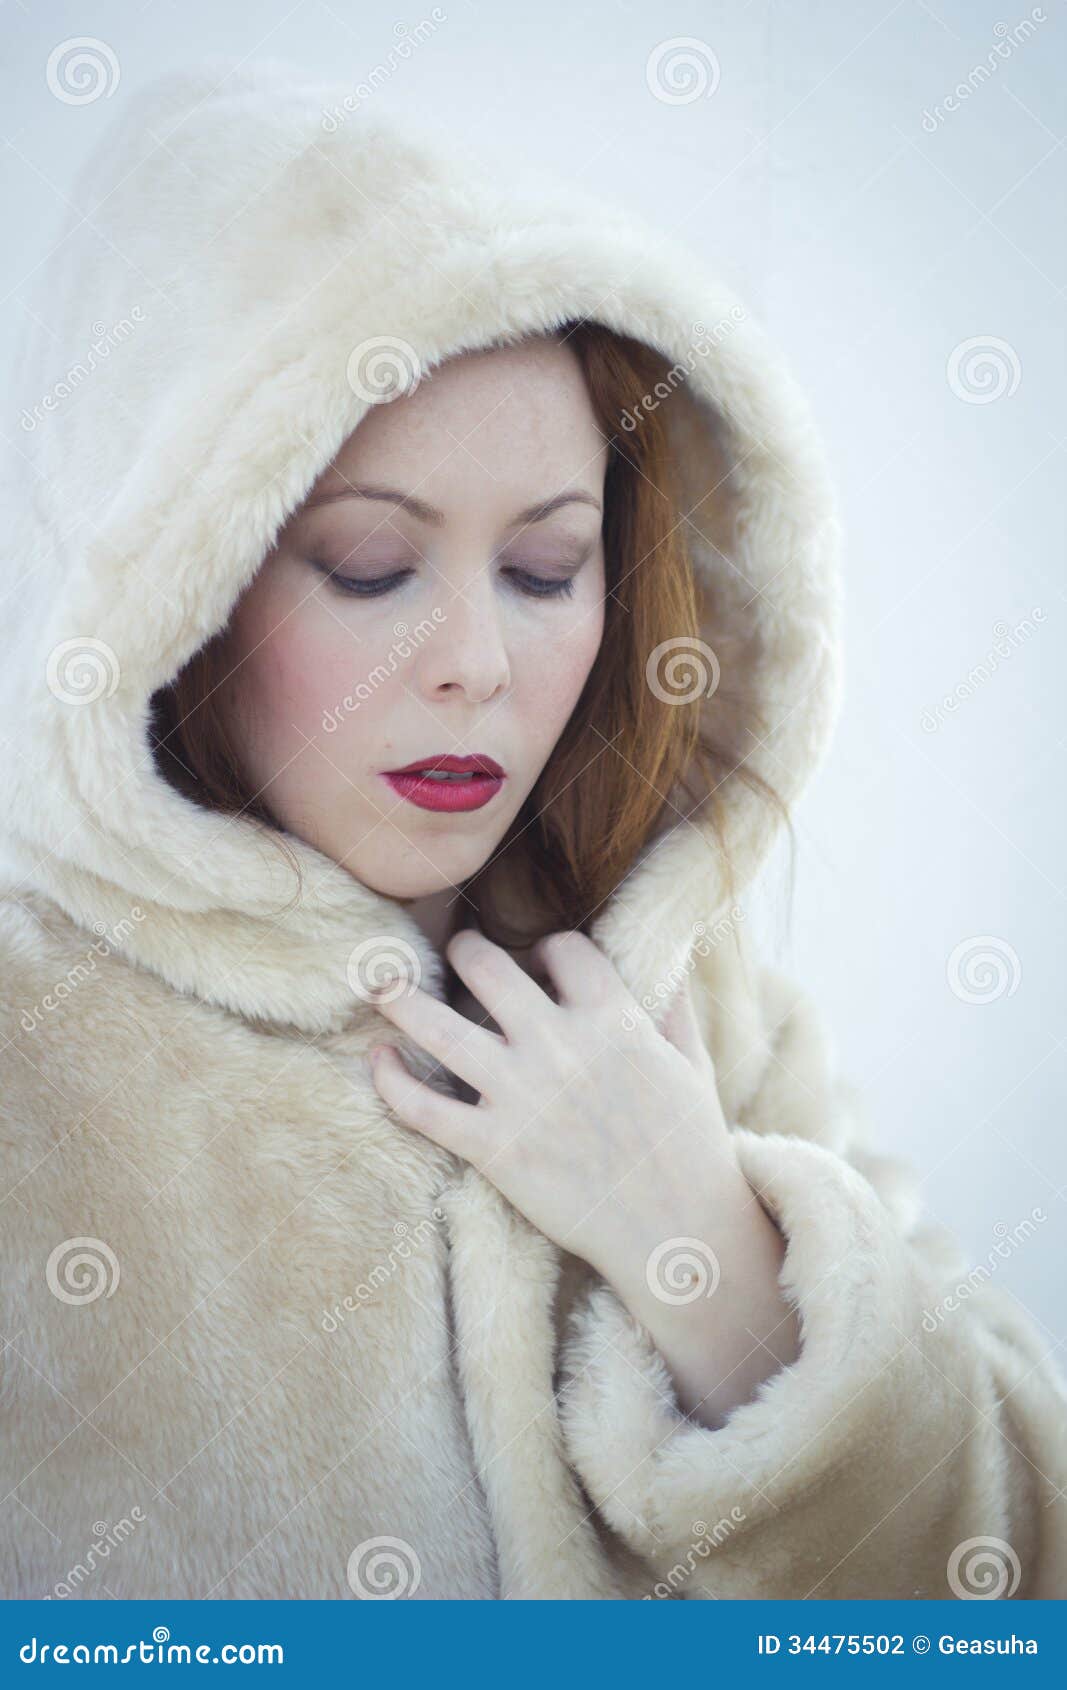 Woman in a warm coat stock photo. Image of cold, winter - 34475502